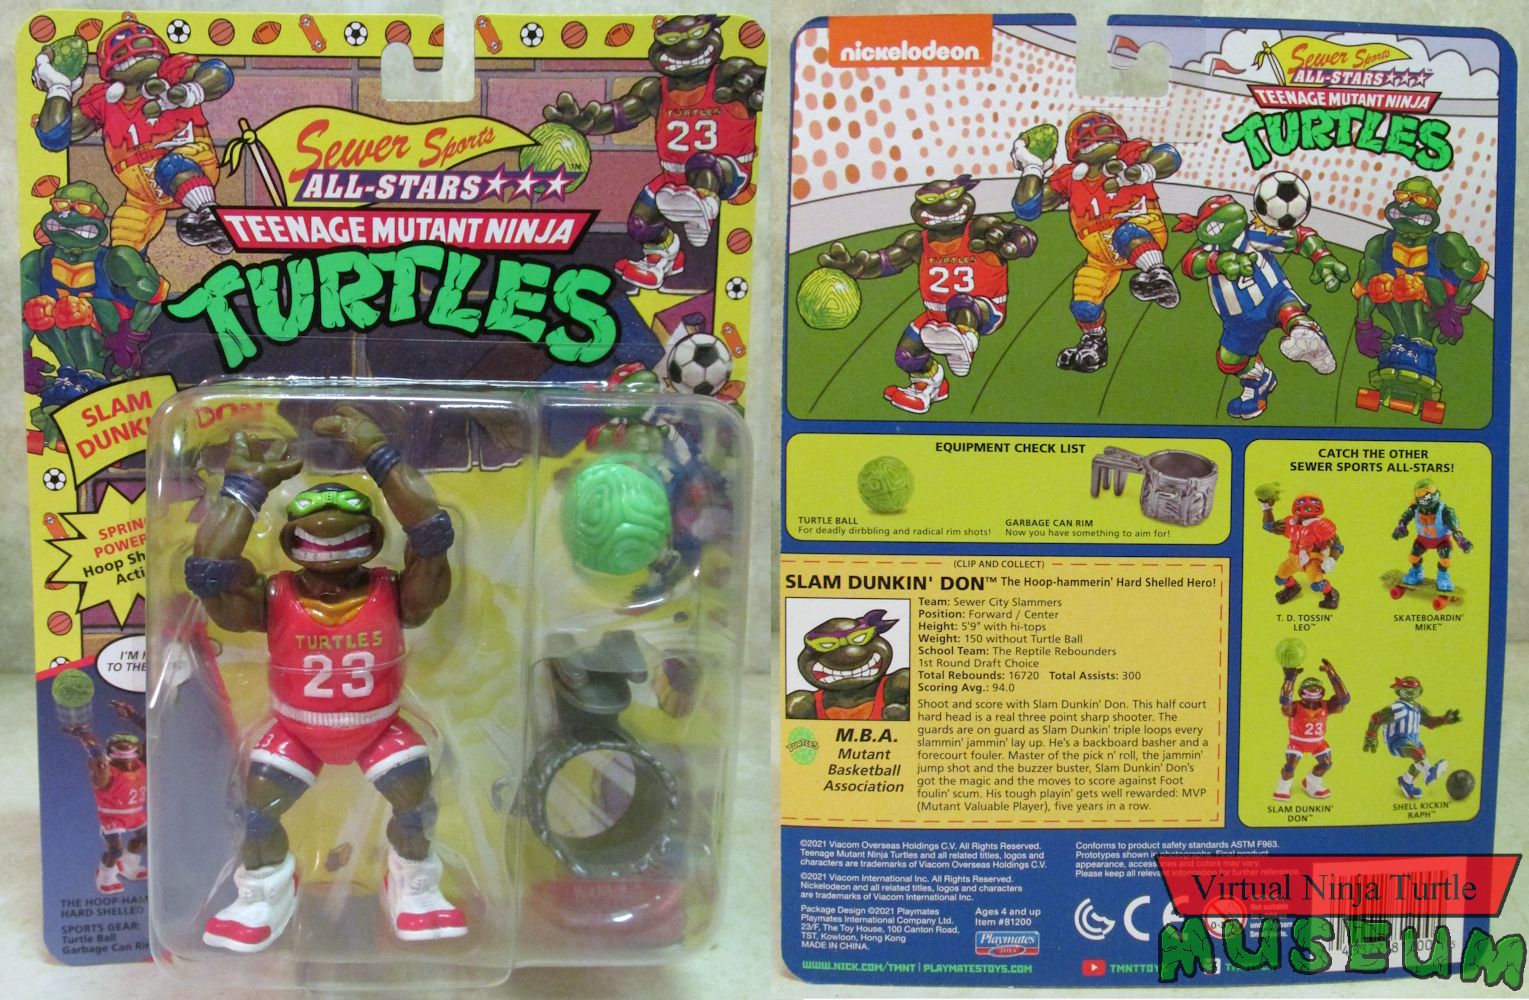 Sewer Sports 4 Pack card front and back